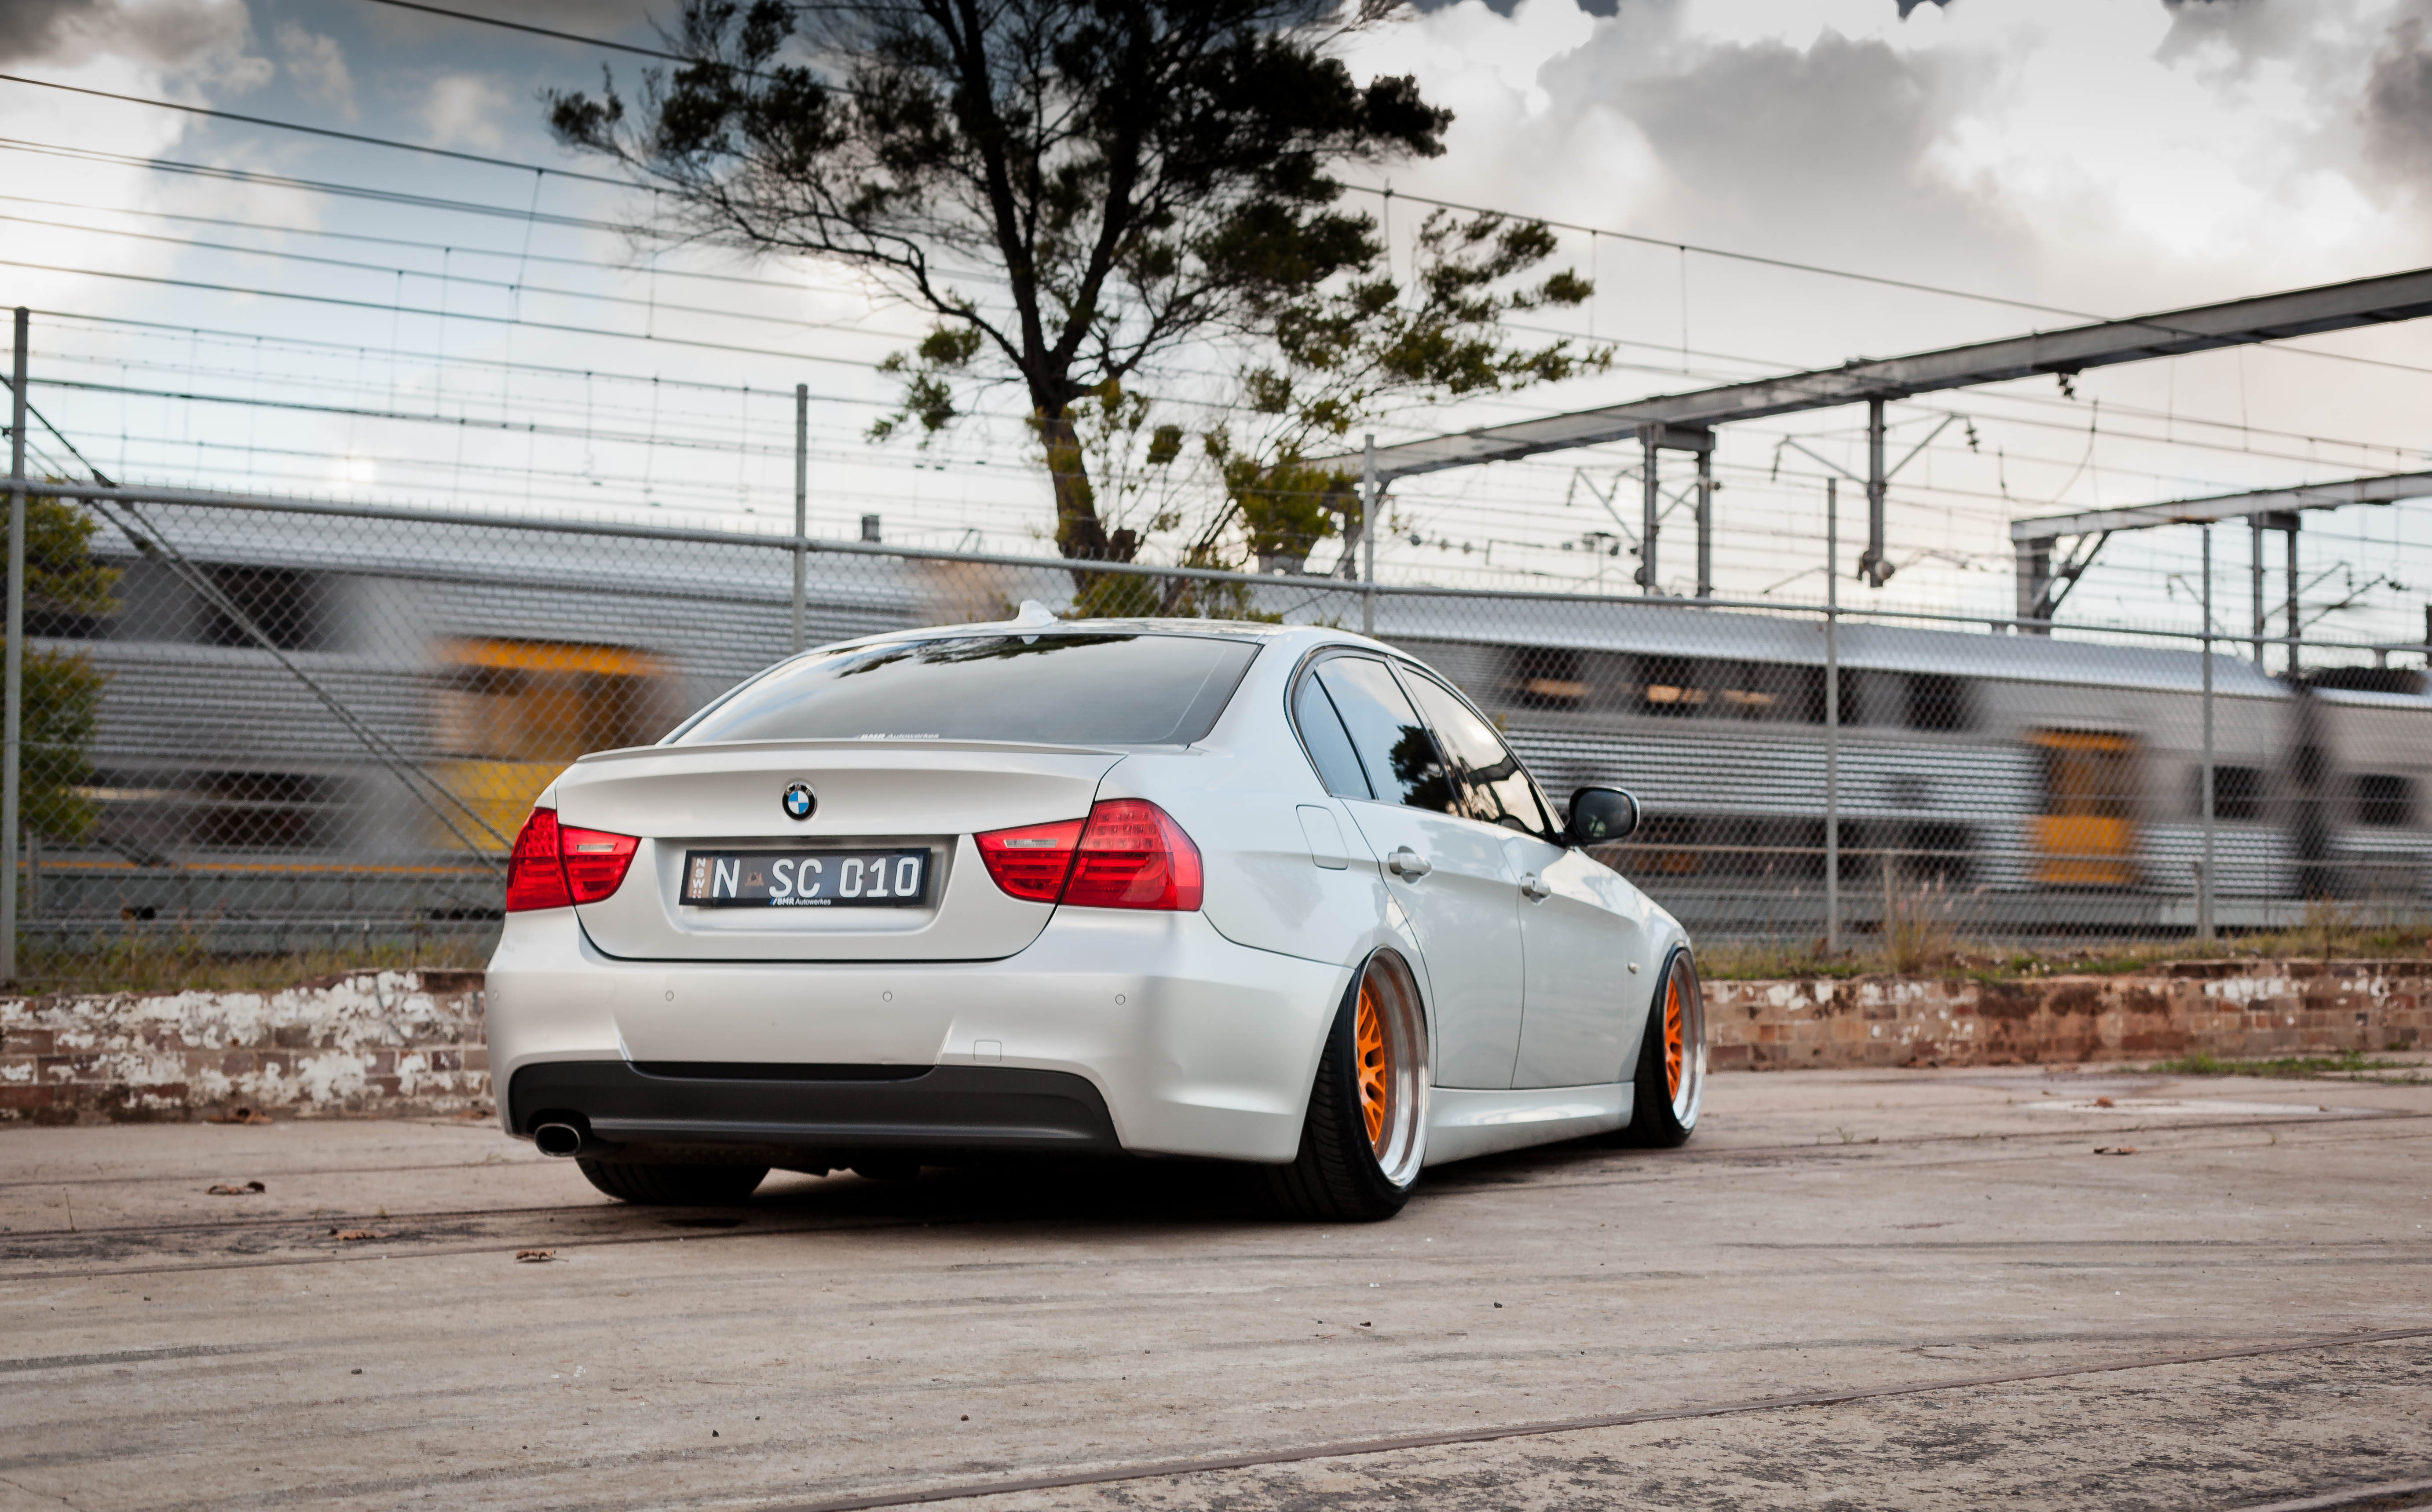 Download wallpaper BMW, BMW, grey, tuning, E90, The 3 series, 320d